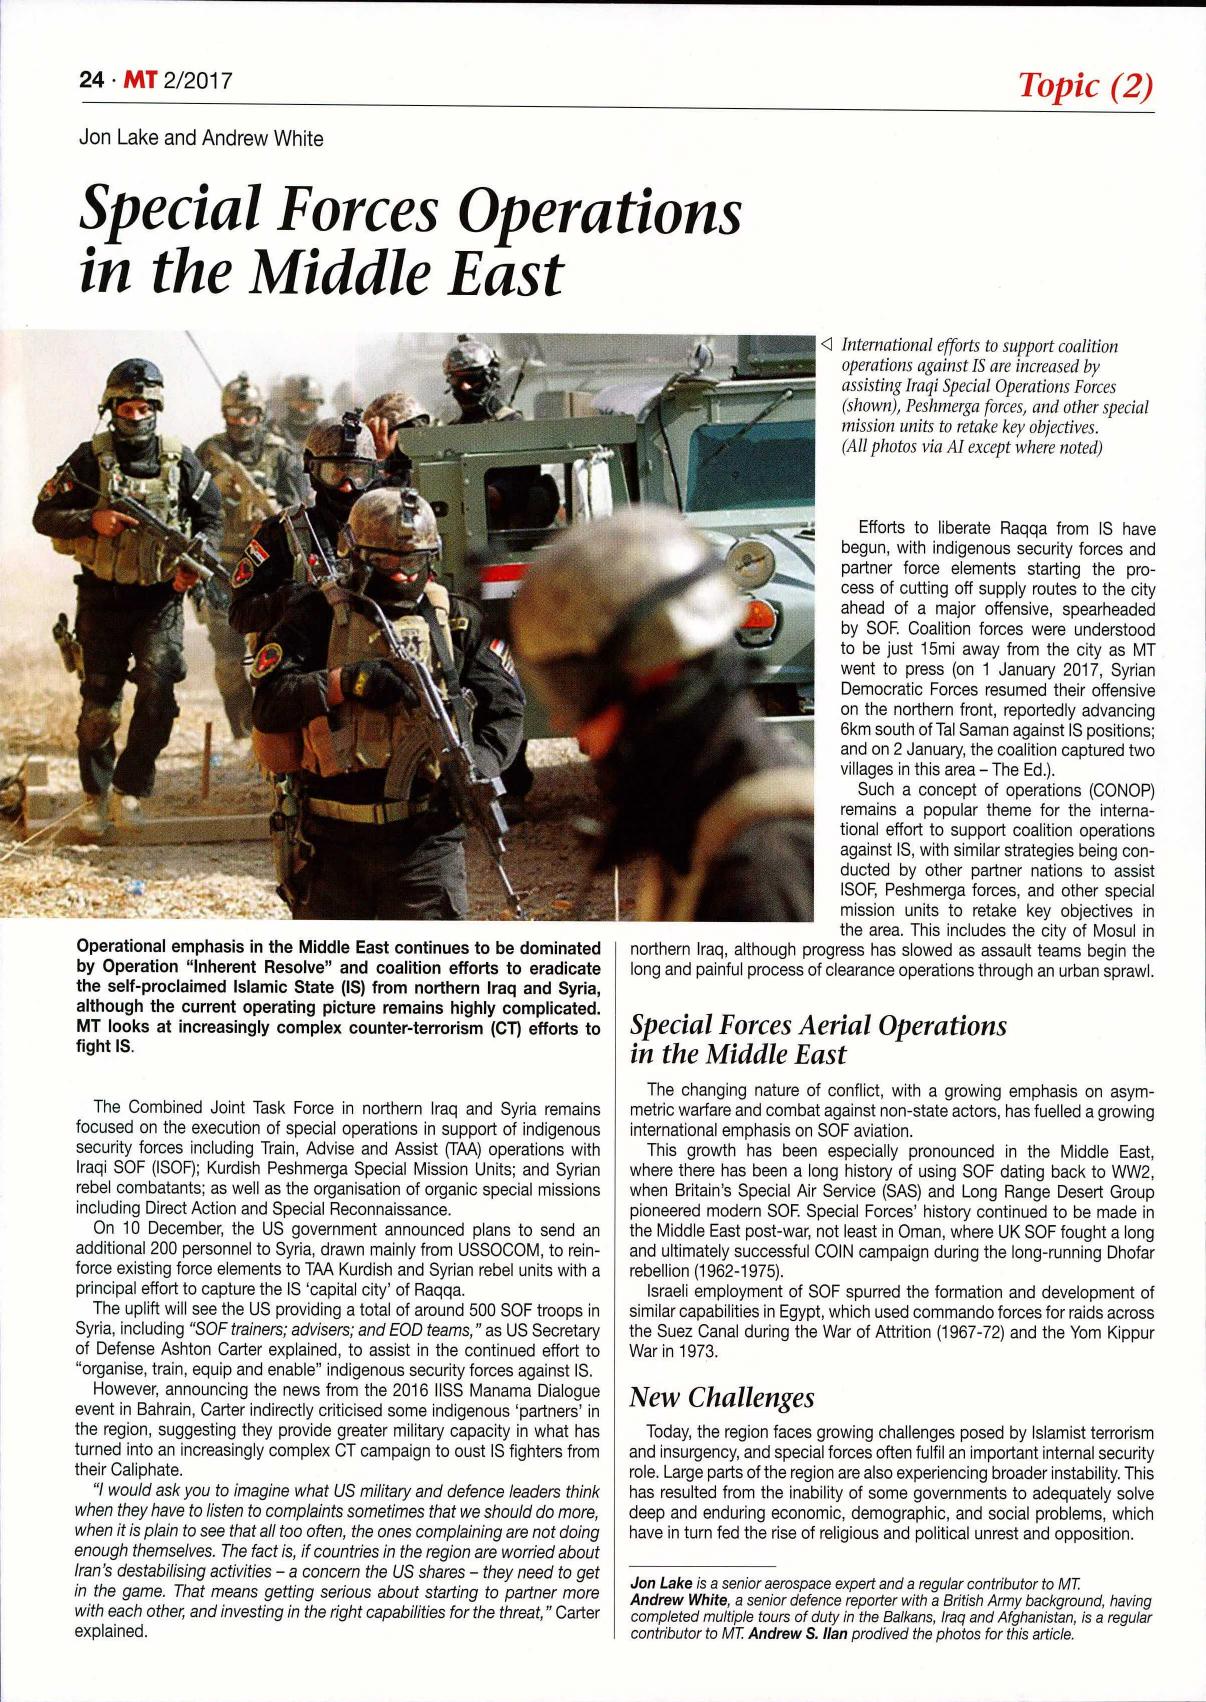 SOF in the Middle East by Unknown